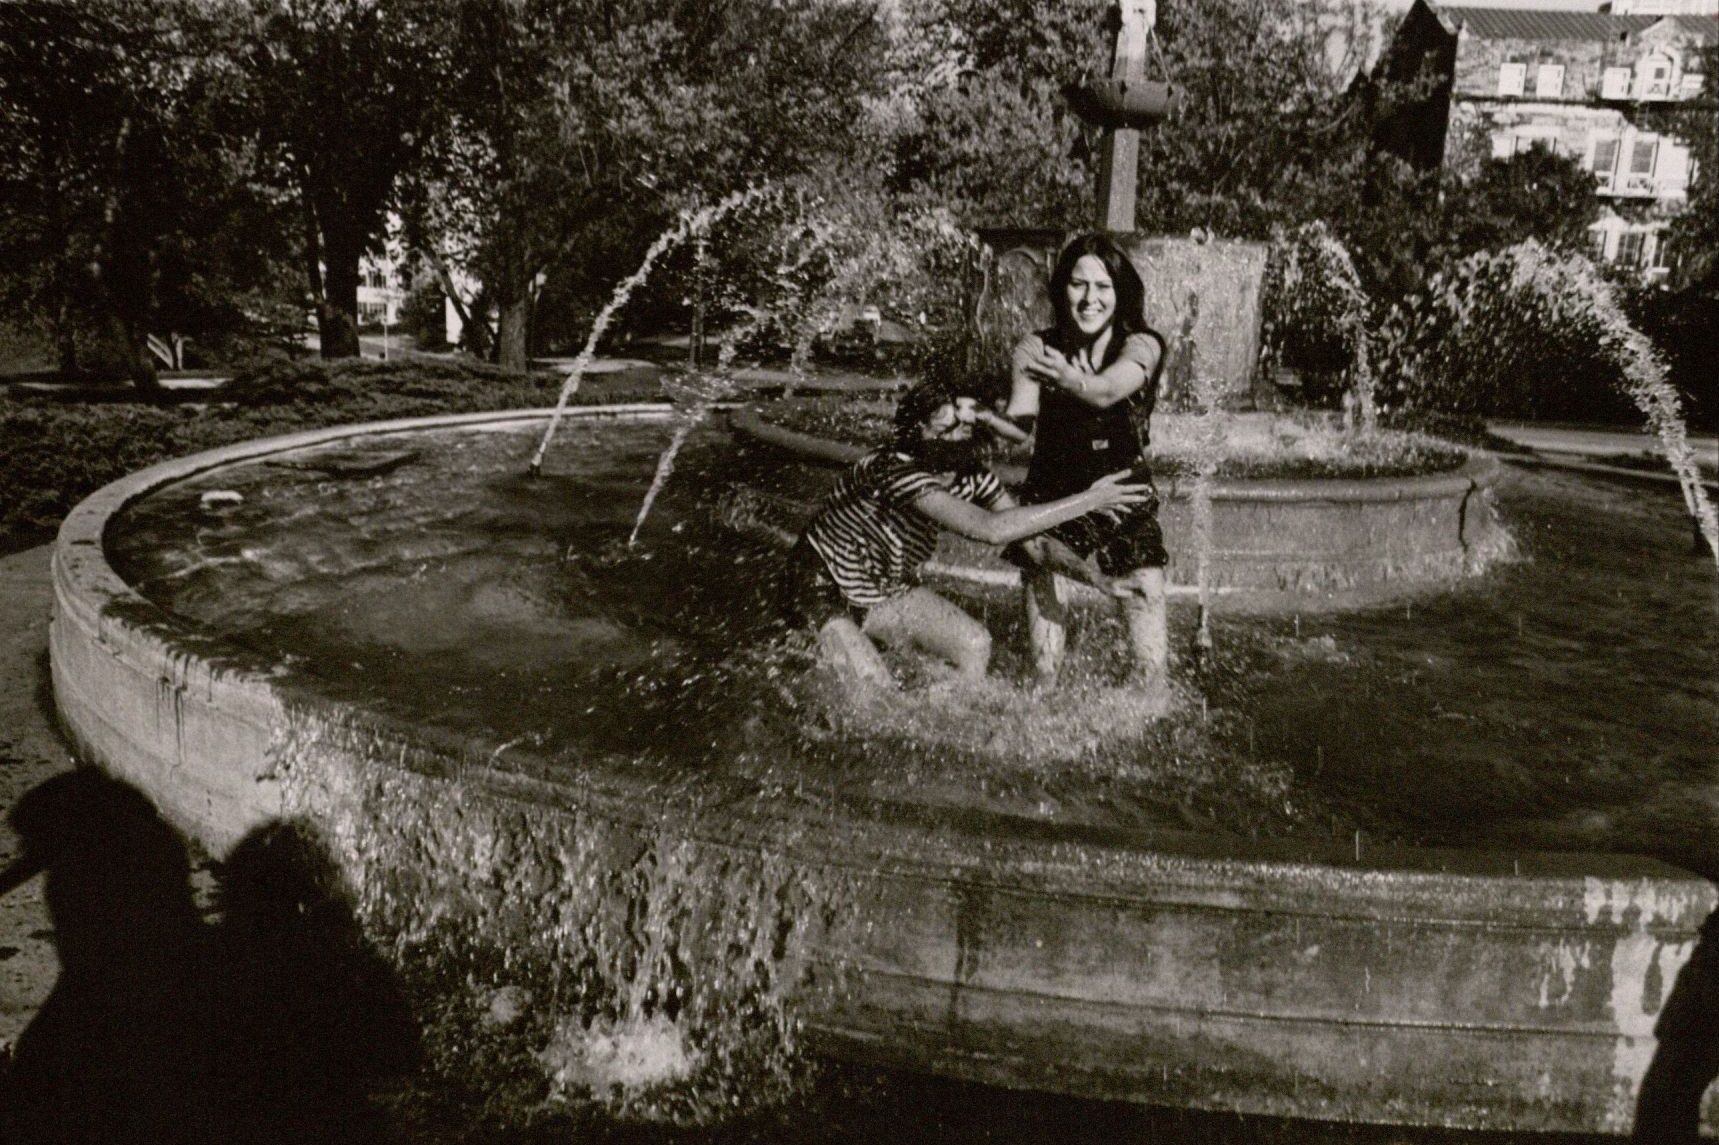 Photograph of two women playing in the water of the Chi Omega Fountain, 1970s